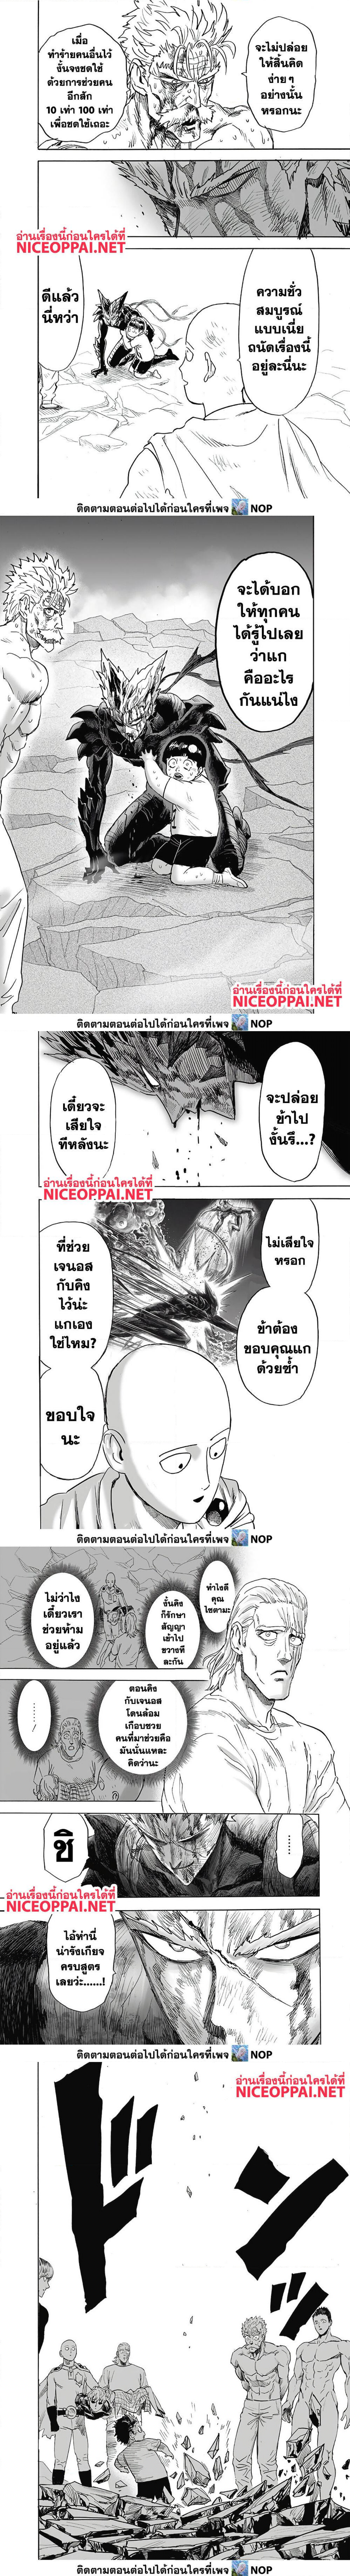 One Punch Man09